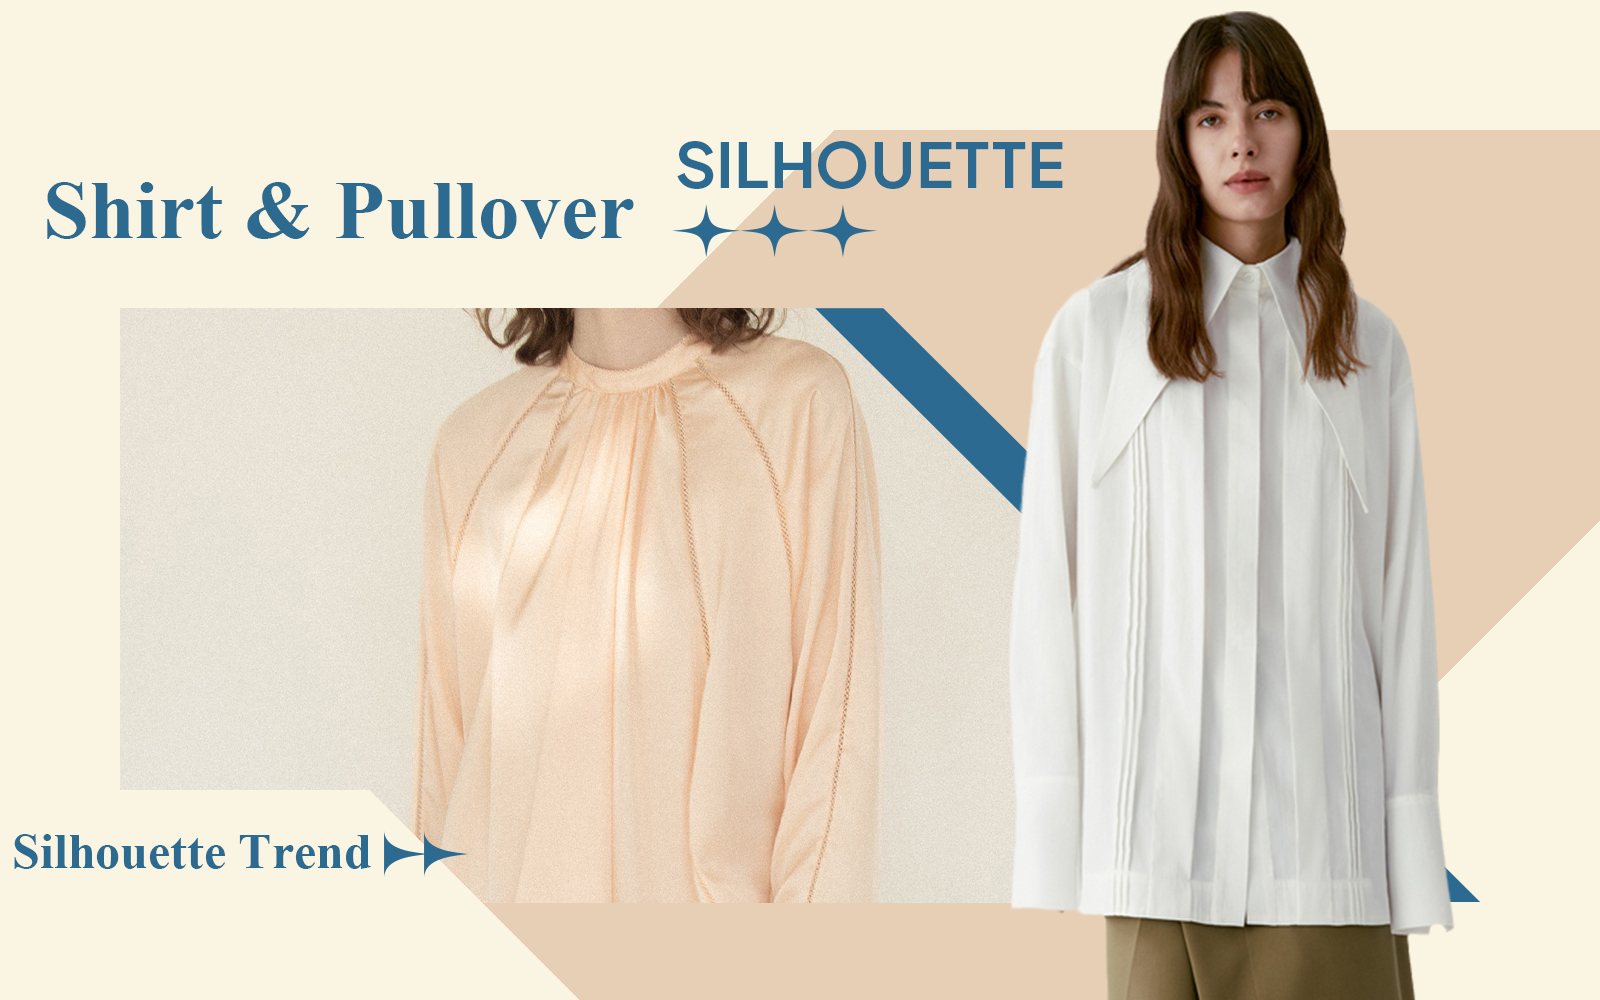 Comfortable & Practical -- The Silhouette Trend for Women's Shirt & Pullover